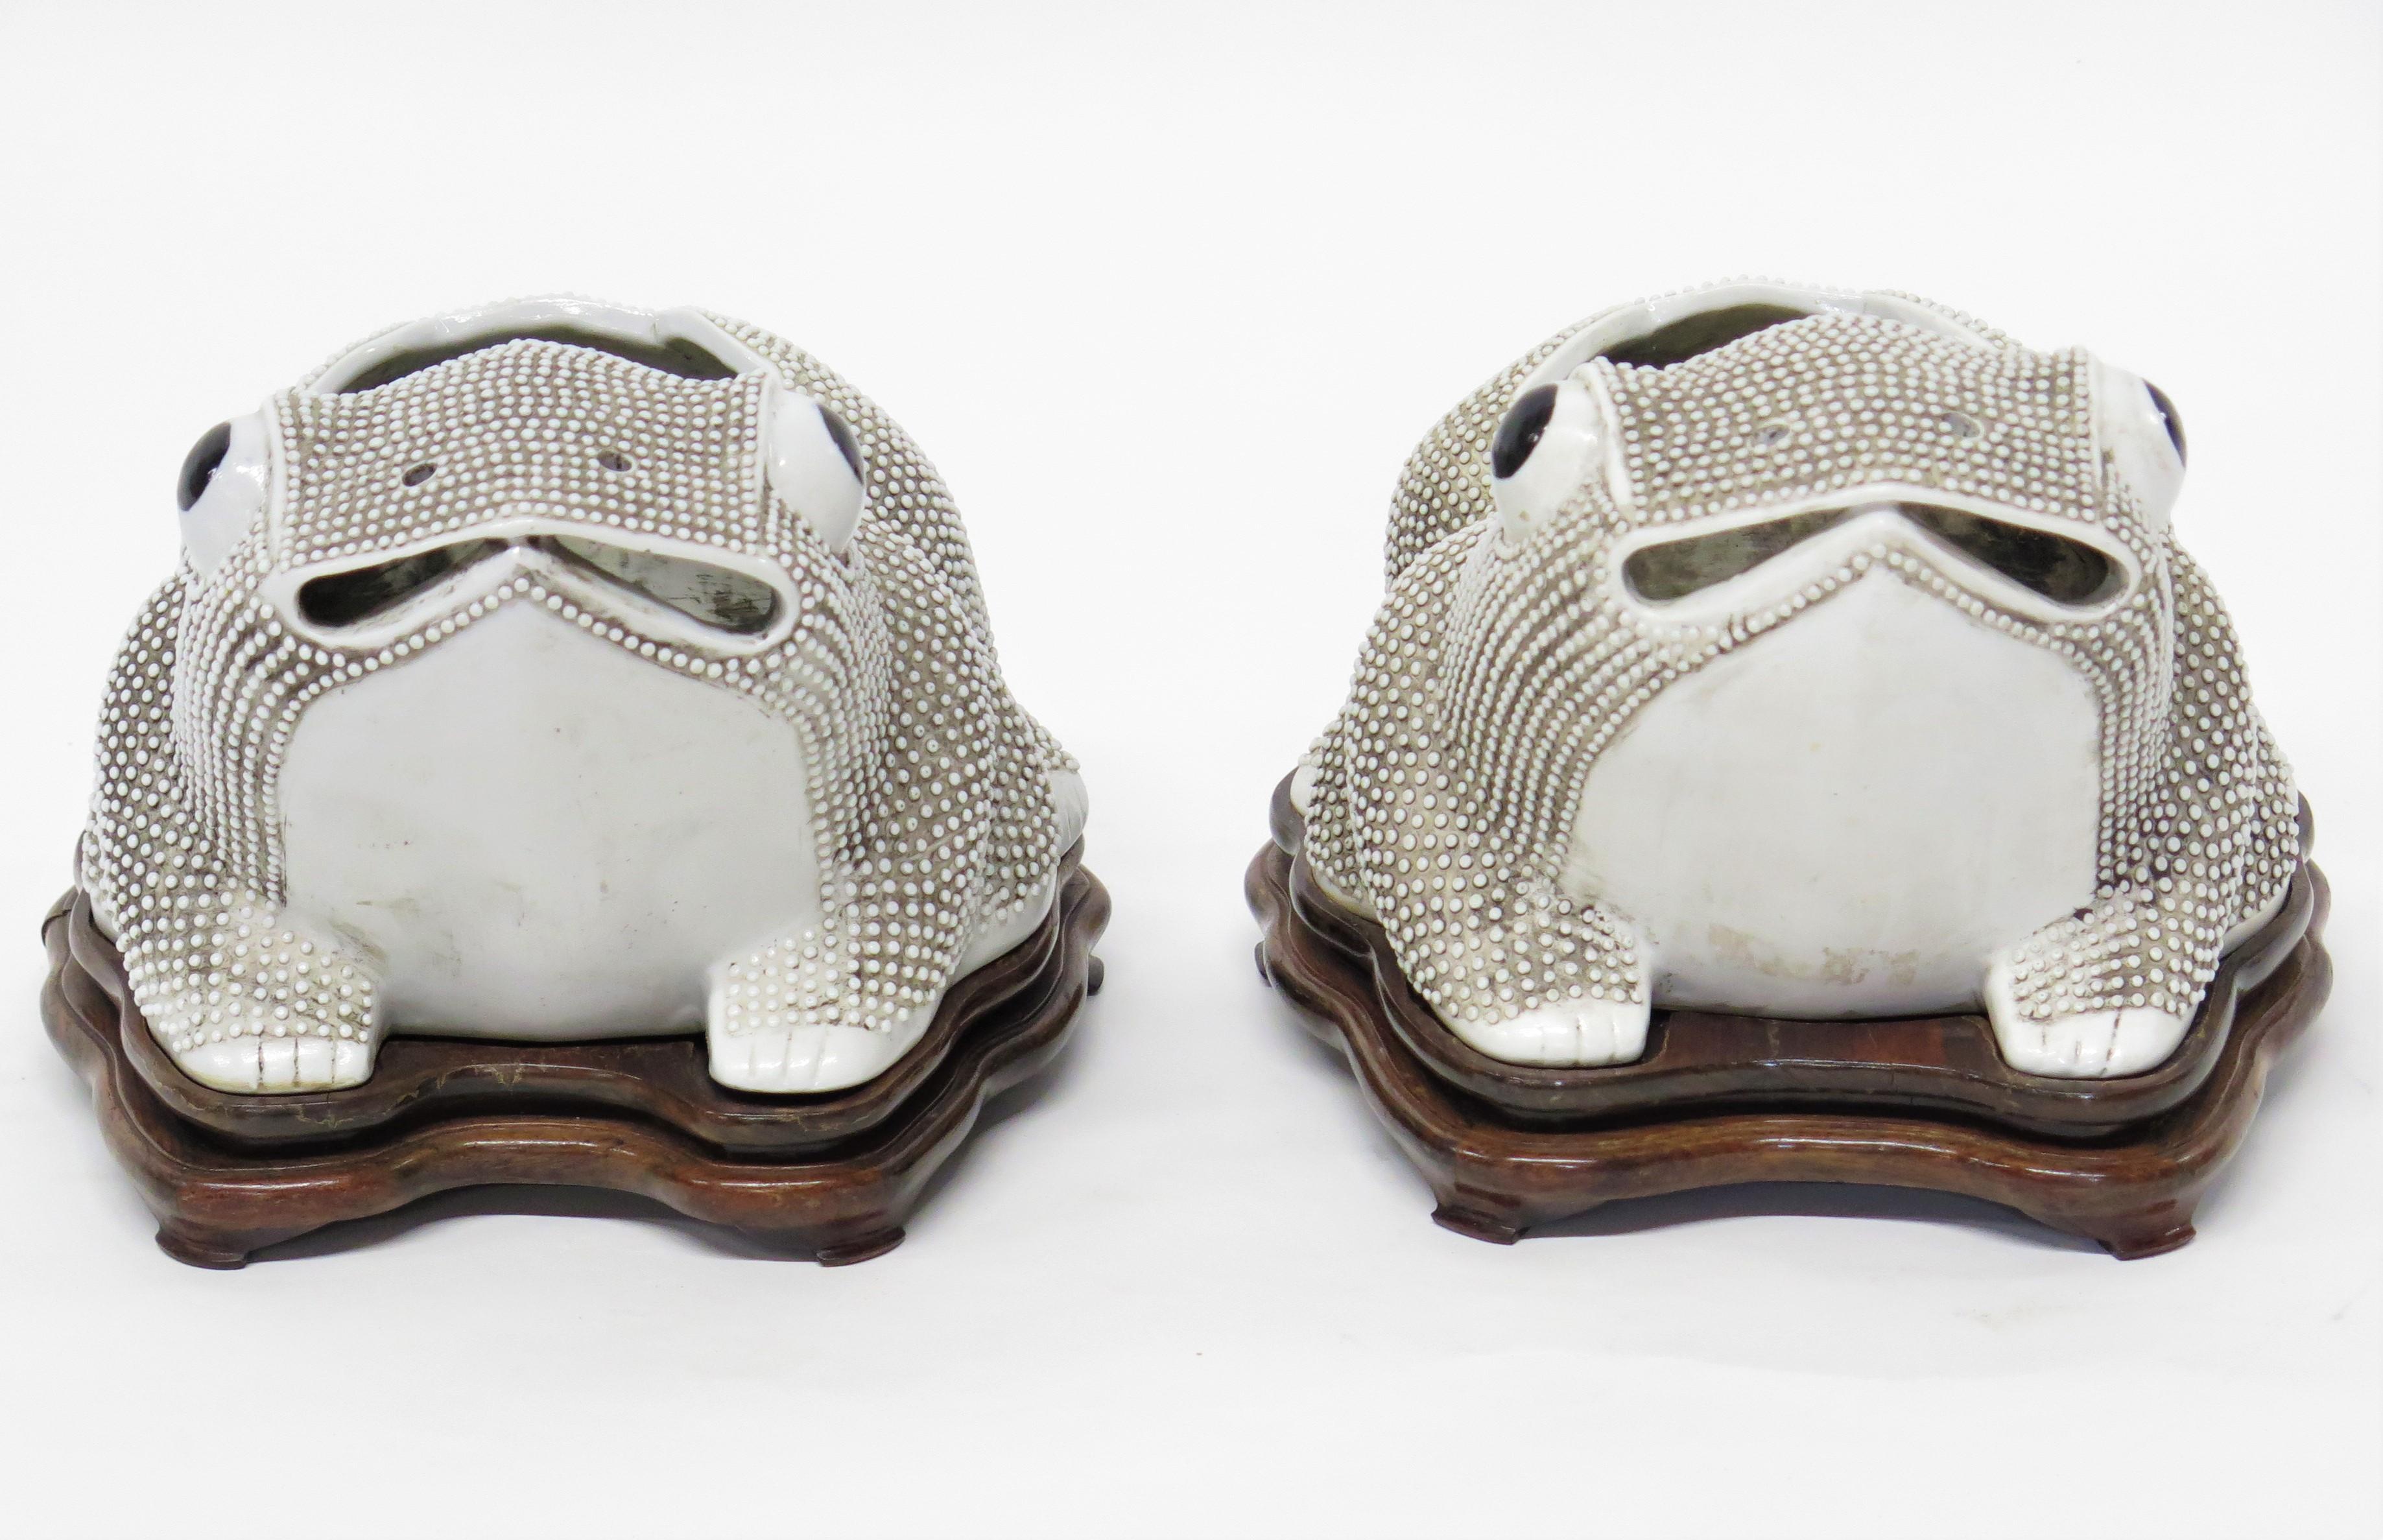 pair of Chinese export frog jardinieres, white with custom wooden stands. China, 19th century